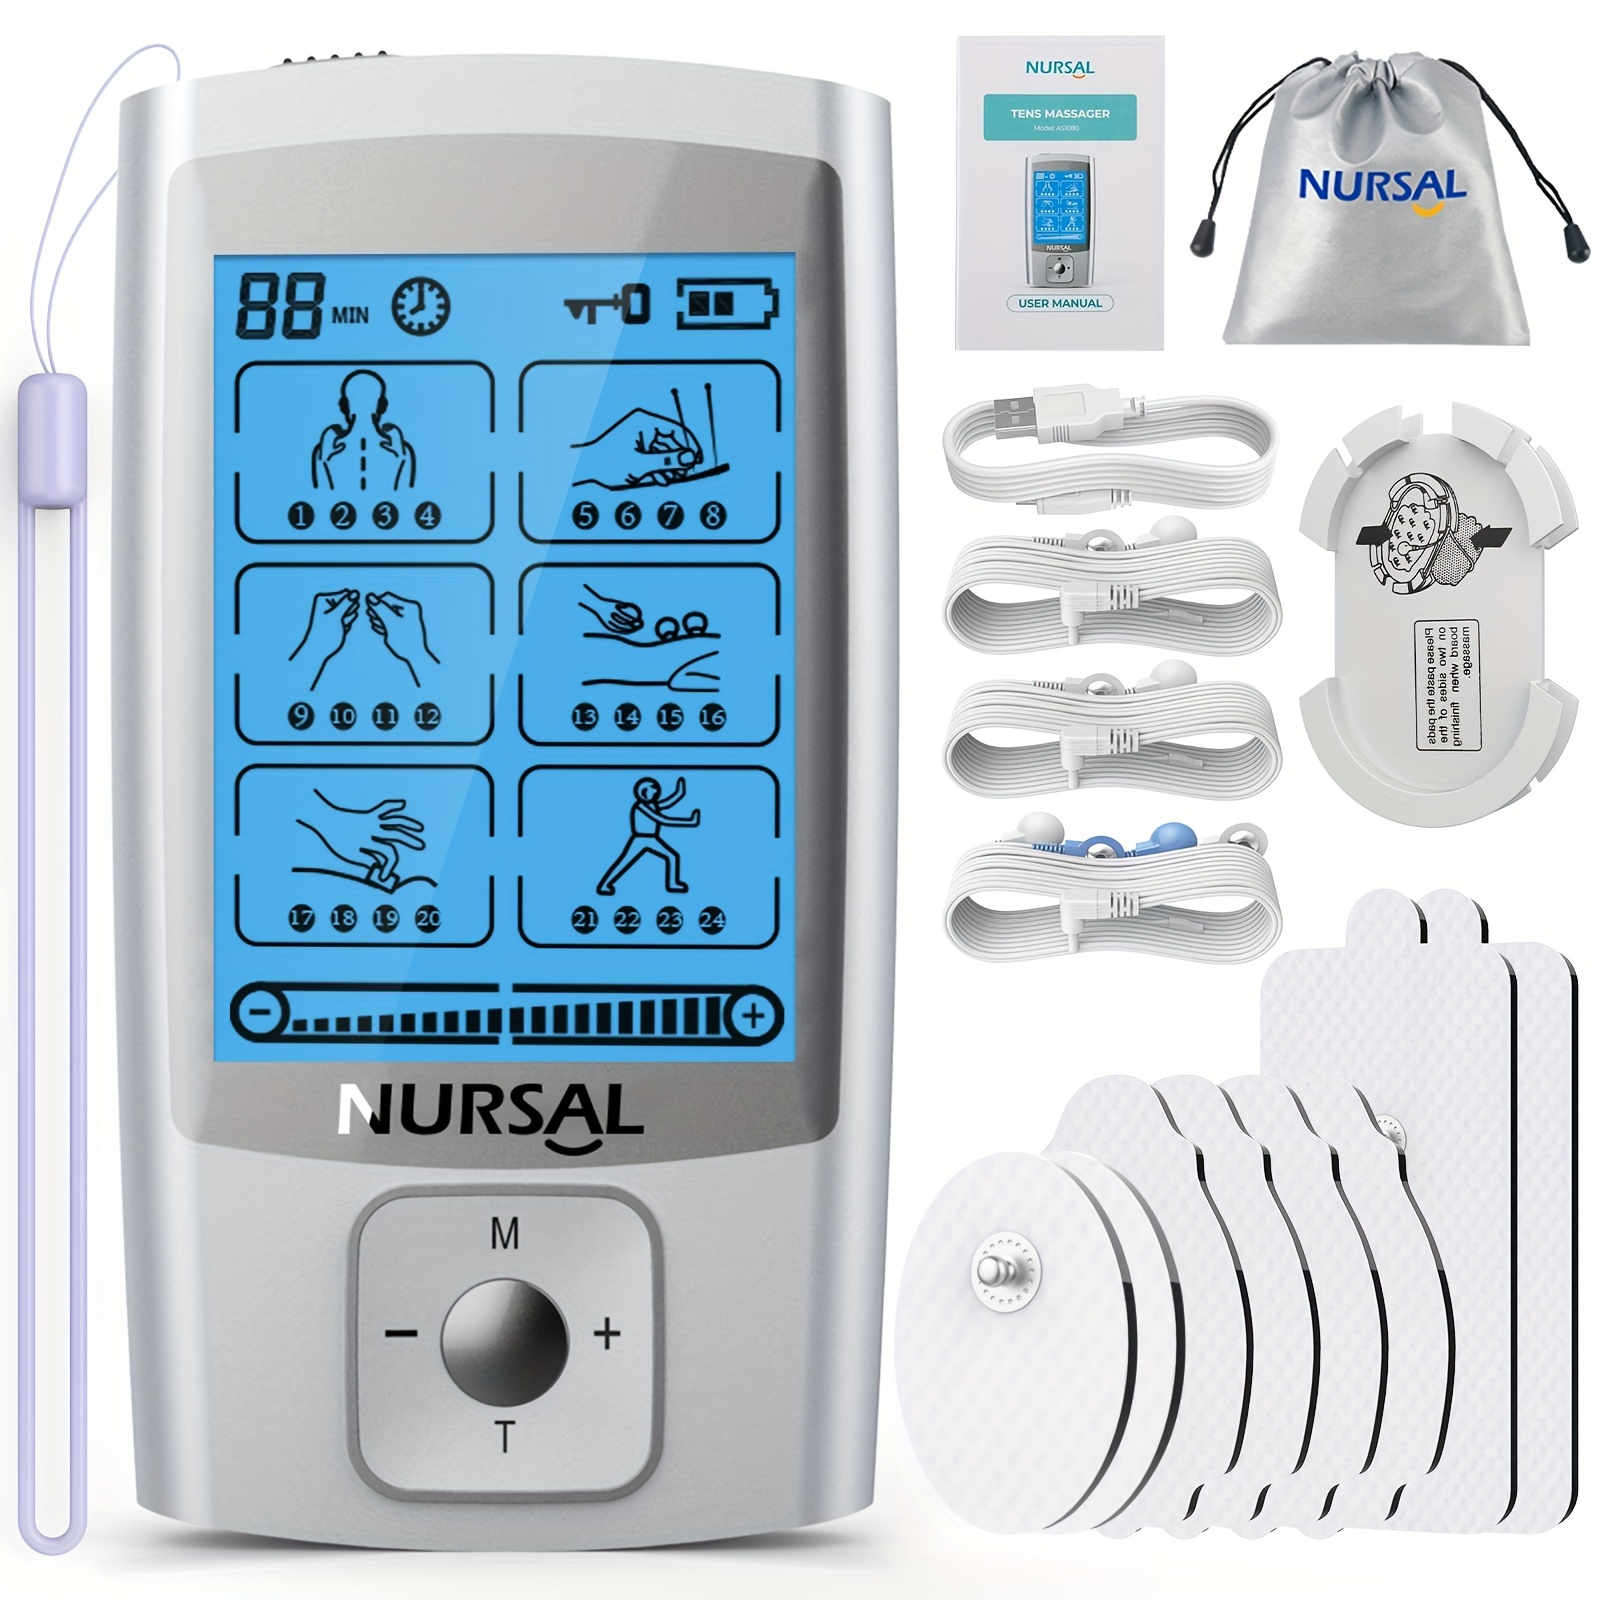 TENS Unit Muscle Stimulator, Wireless TENS Pain Relief, Portable Electro  Pulse Impulse Mini Massager Machine for Lower Back and Neck Pain